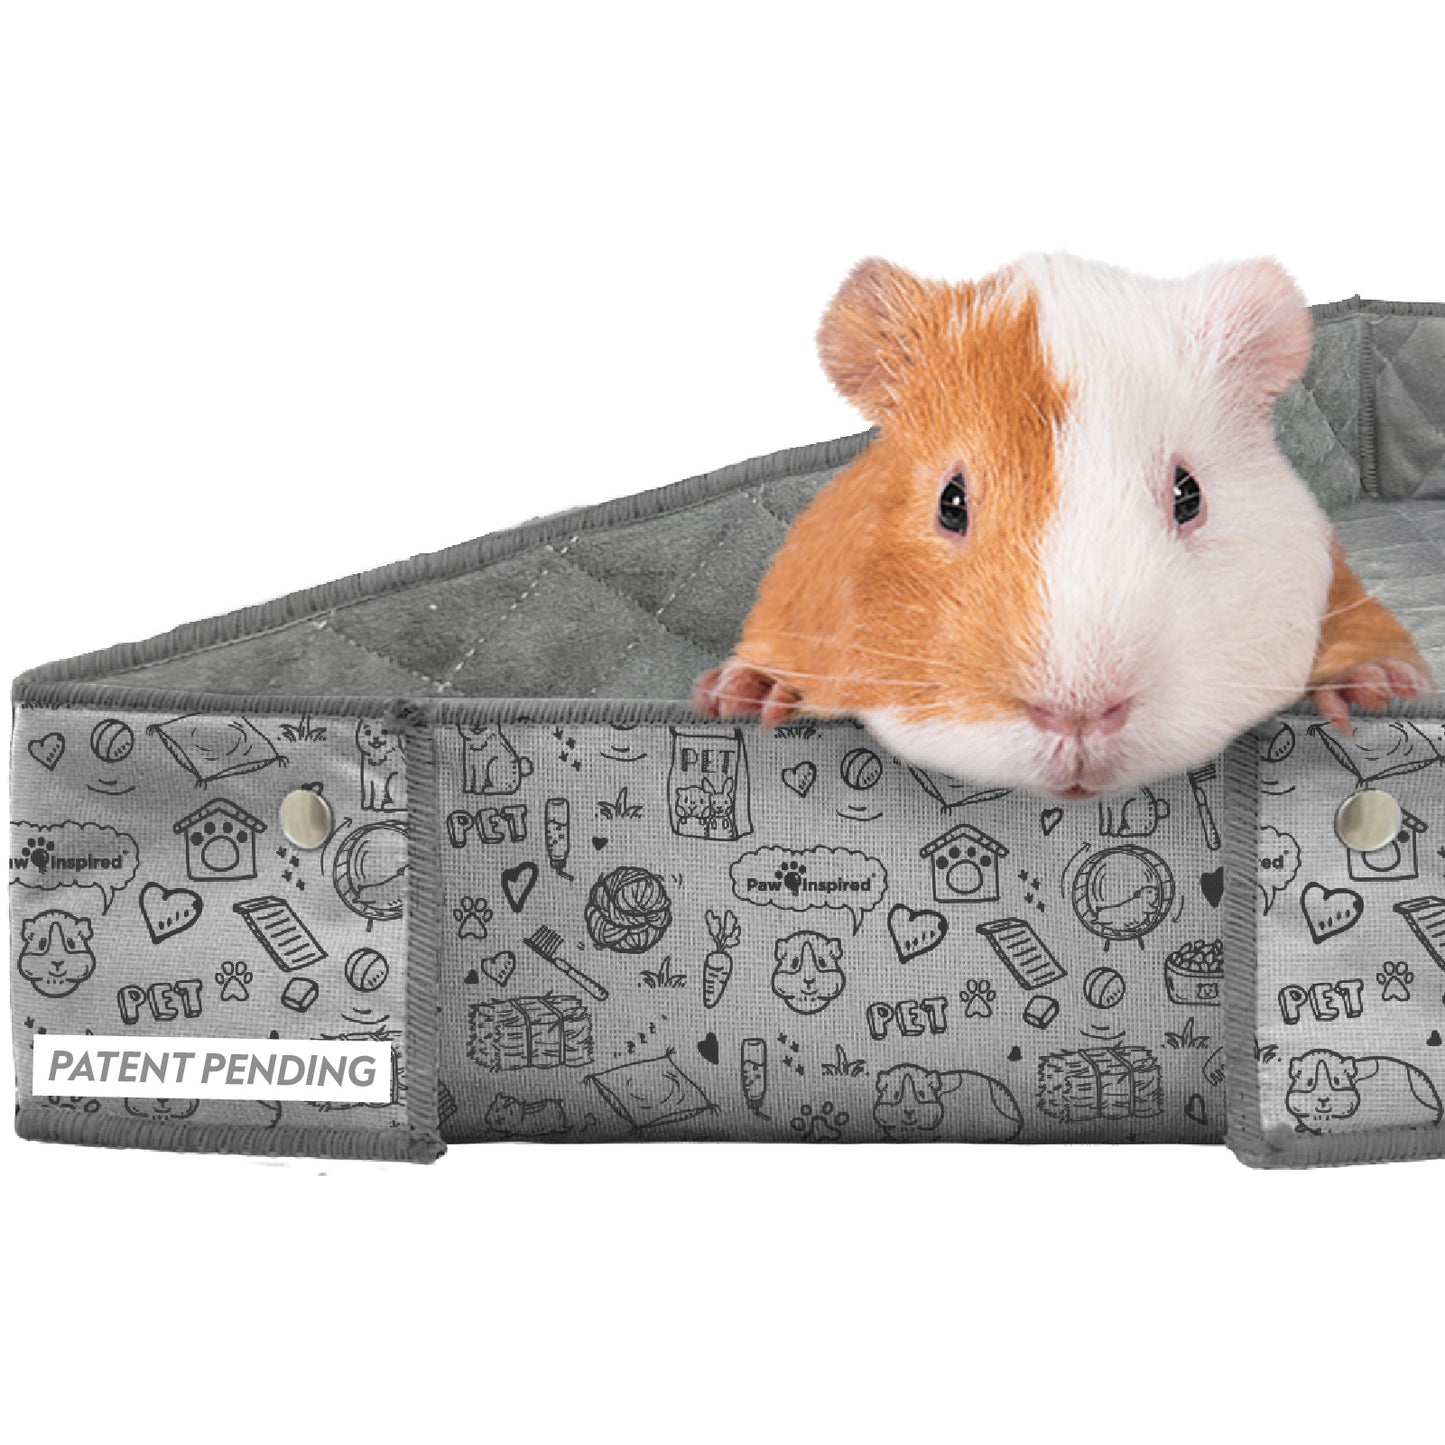 Critter Box® Washable Guinea Pig Cage Liner with Raised Sides